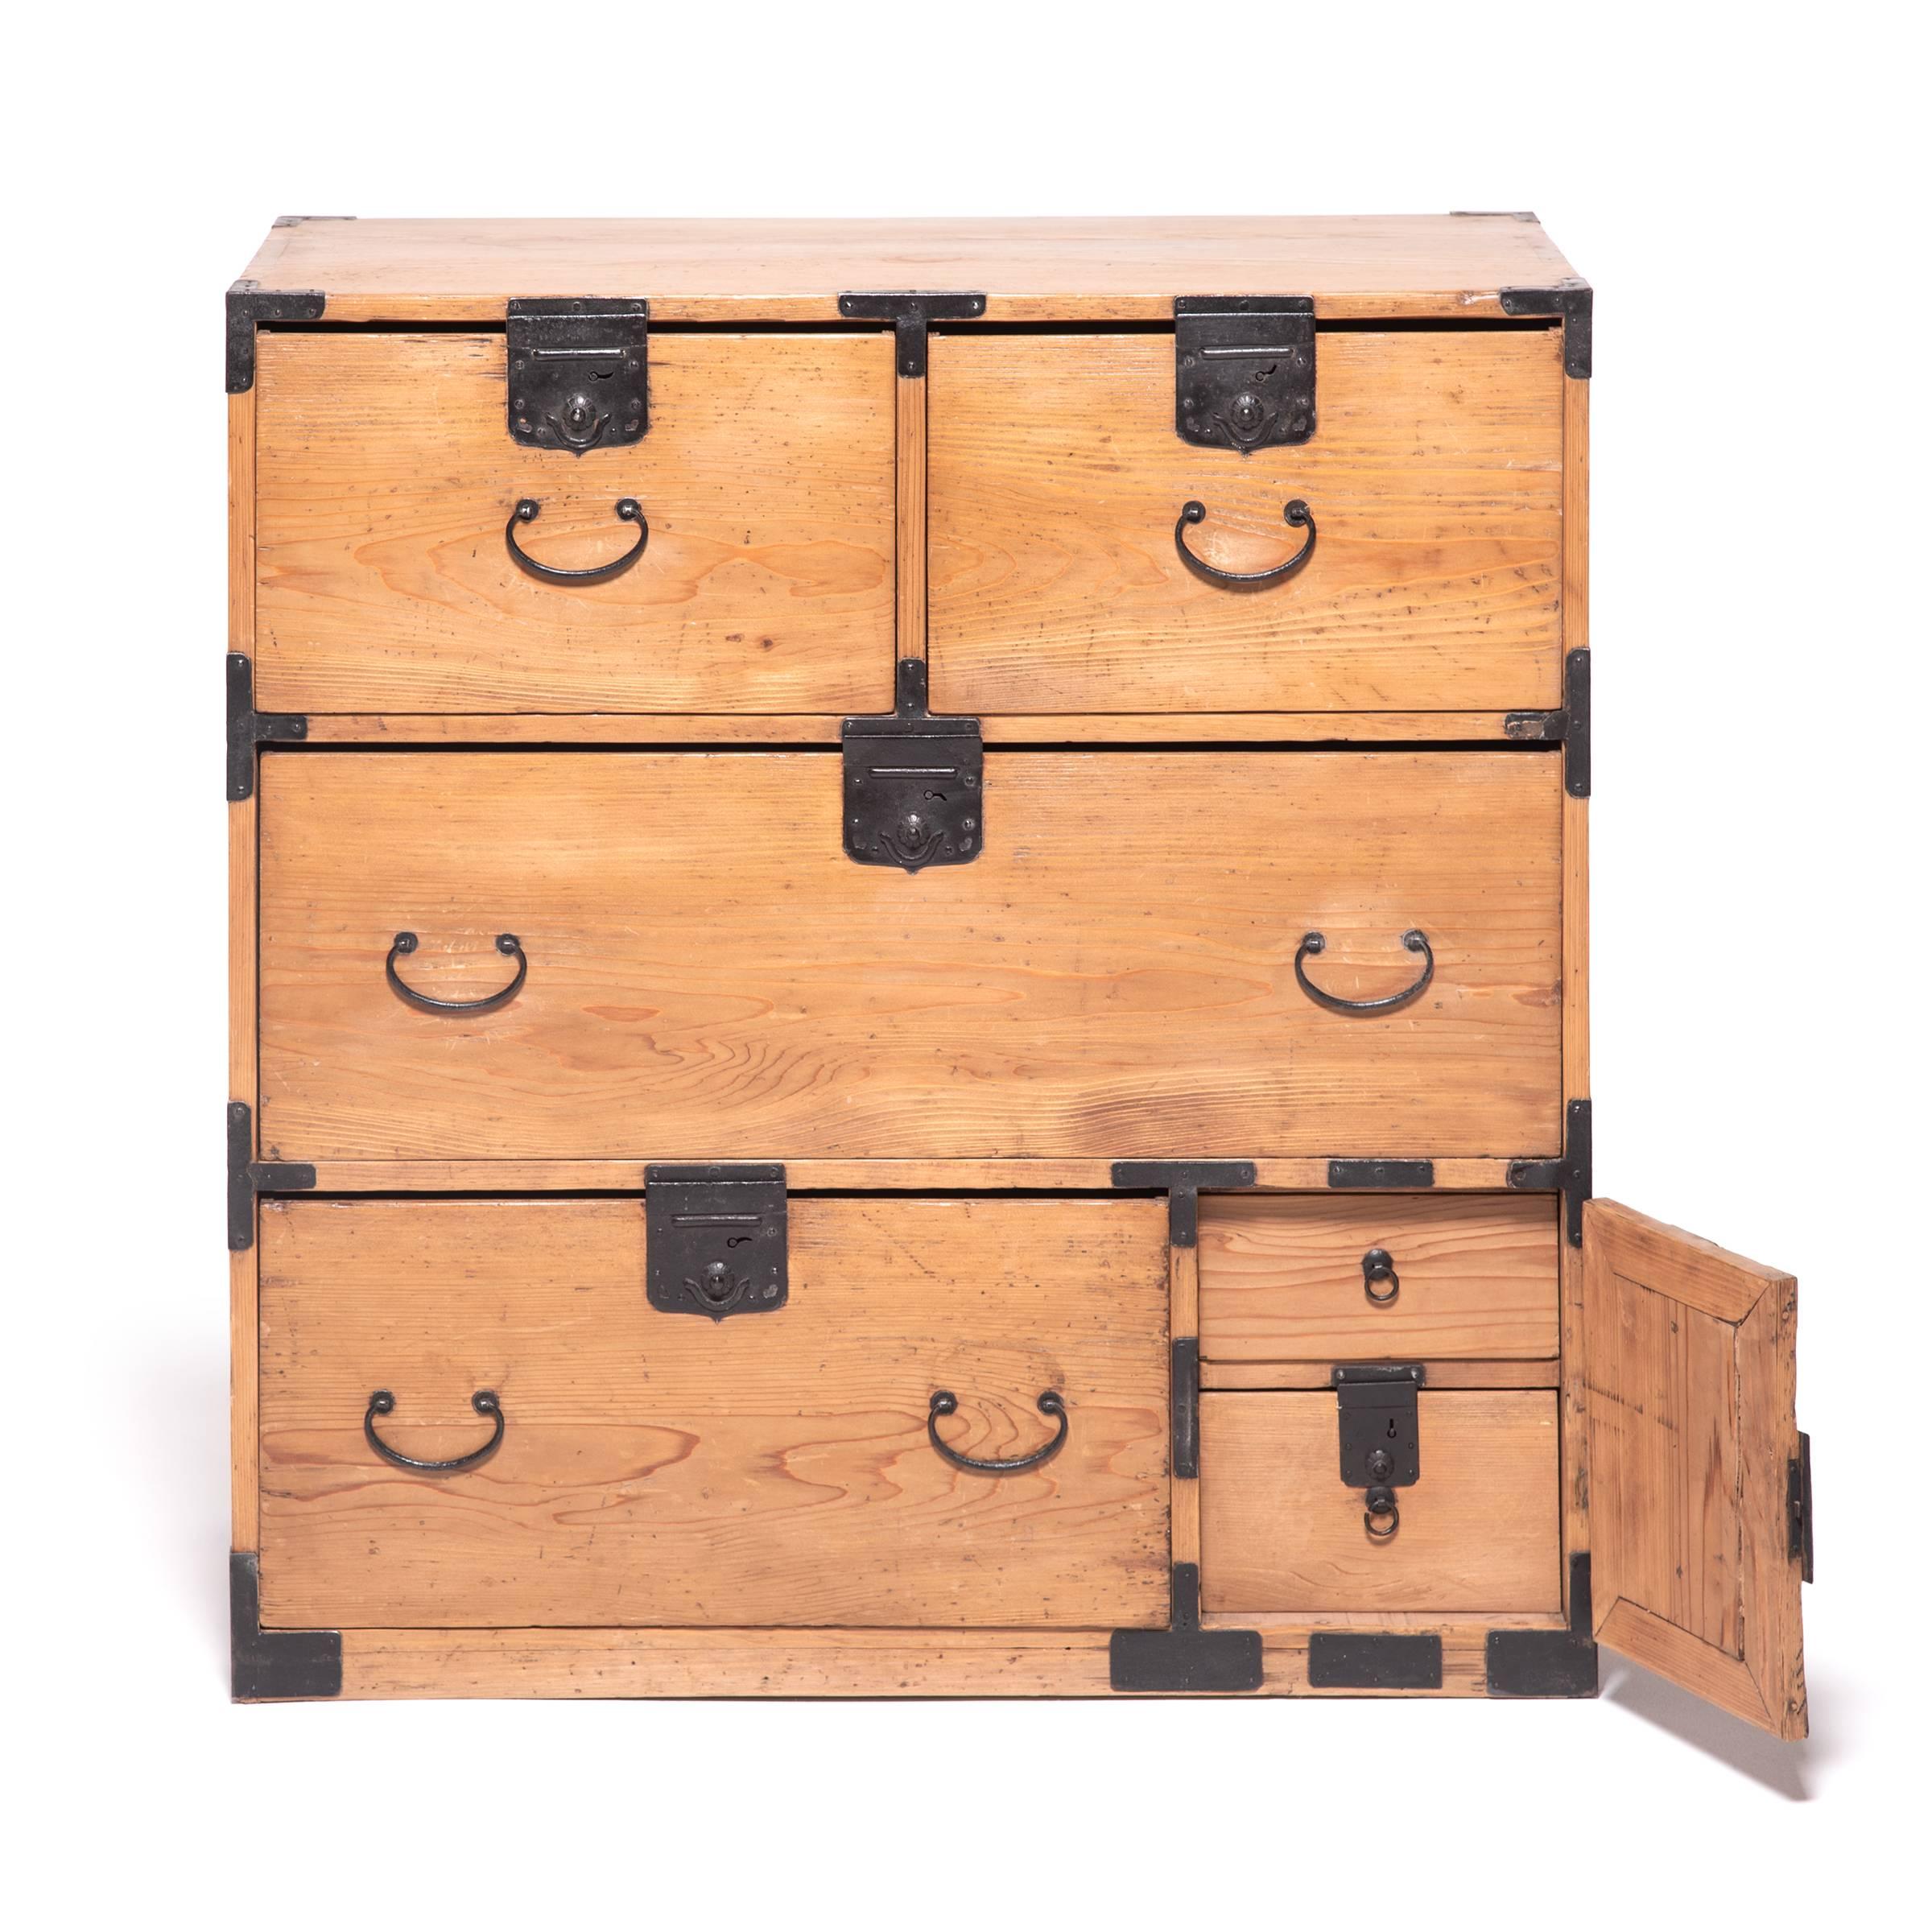 Designed to be portable and functional, Japanese tansu chests were versatile storage cabinets used for all kinds of purposes. This chest of drawers would have originally been used to store kimono. Created during Japan’s Taisho period (1912-1926),